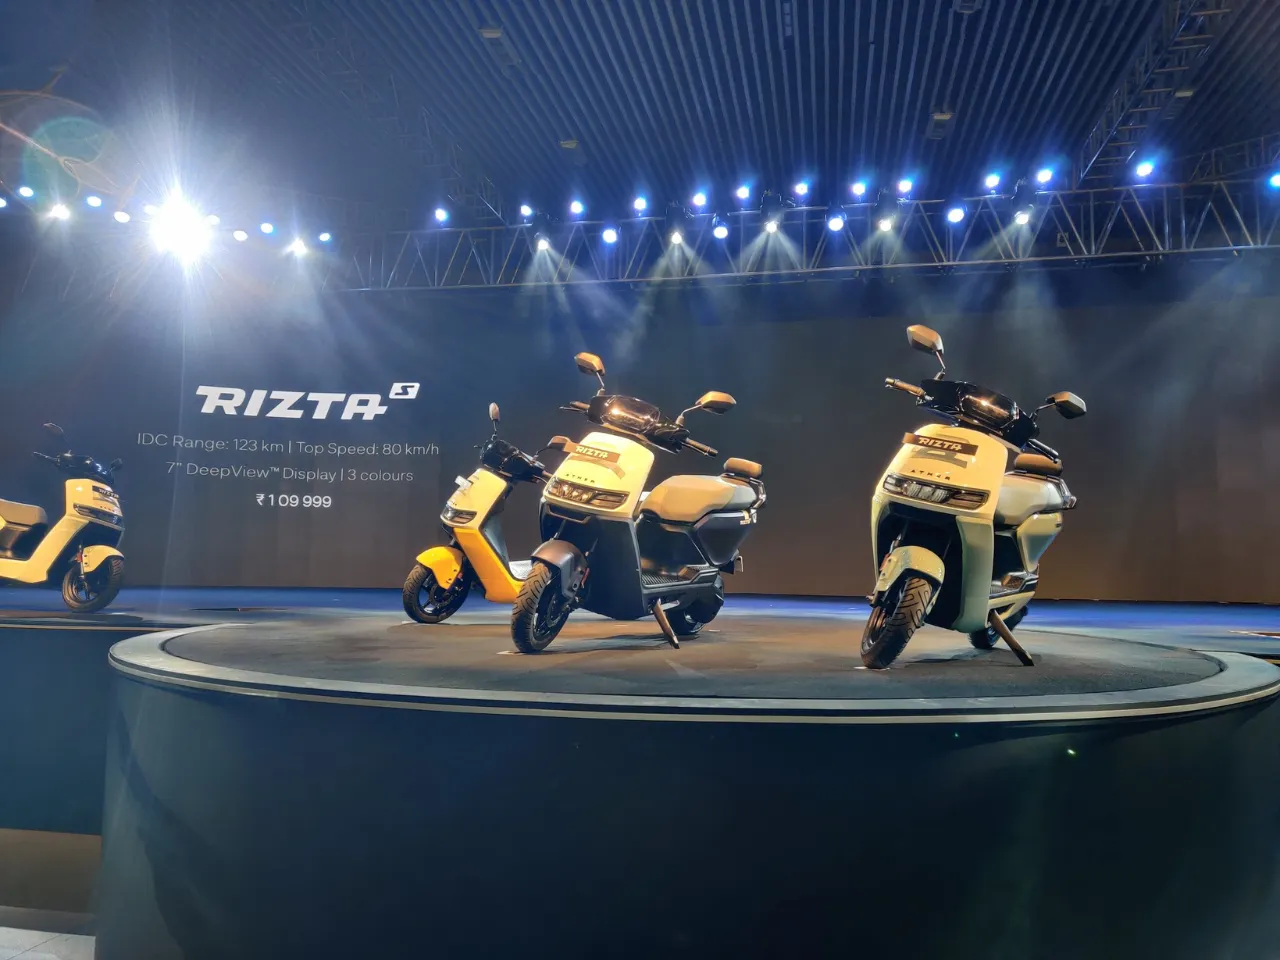 EV startup Ather Energy launches its first family scooter 'Rizta', priced Rs 1,09,999 onwards